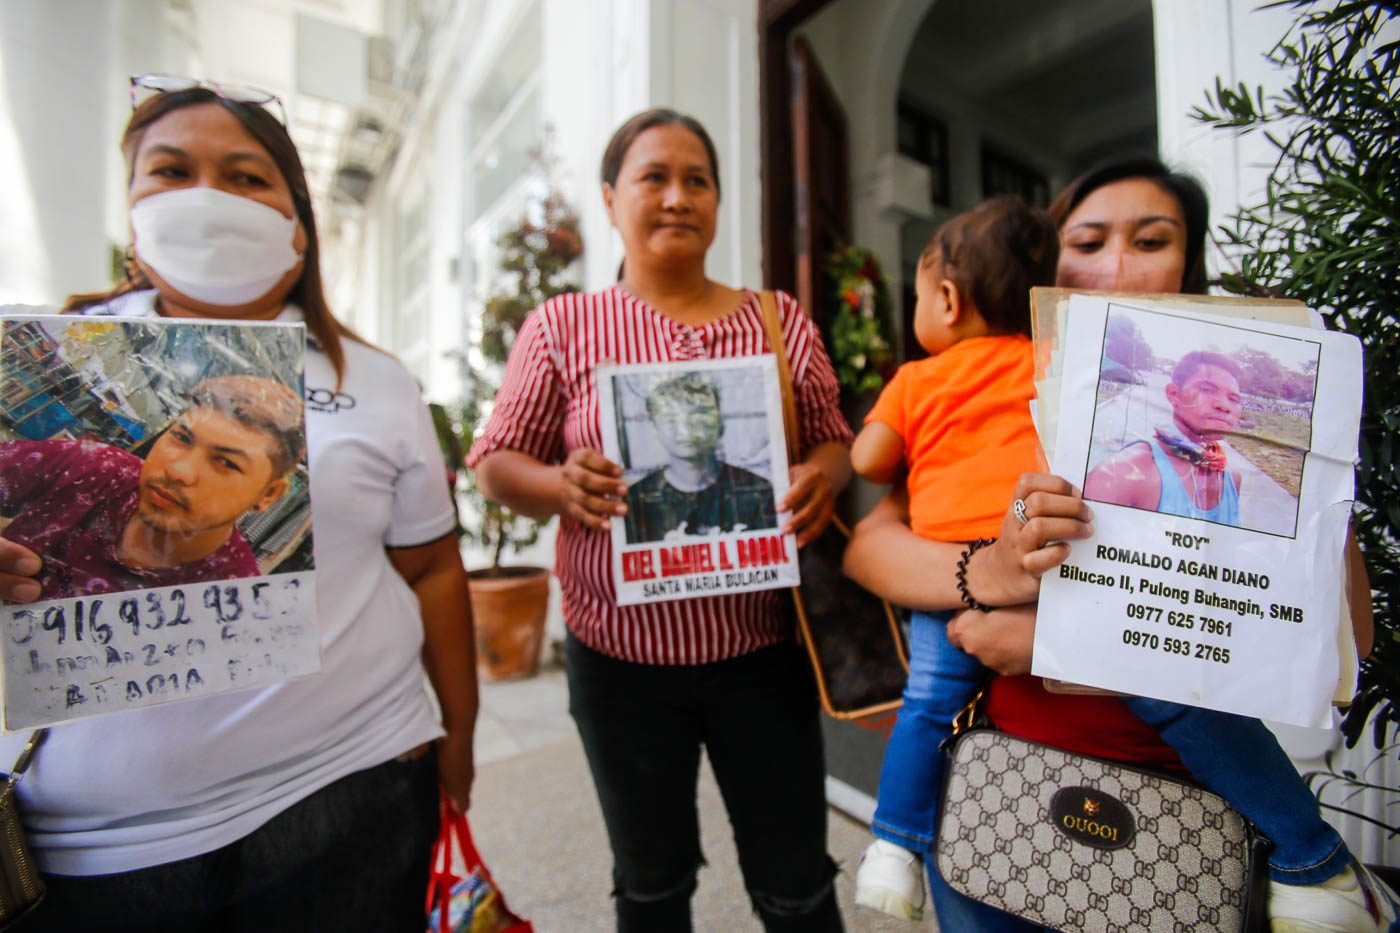 DOJ’s response to missing ‘sabungeros’: Dialogue with families